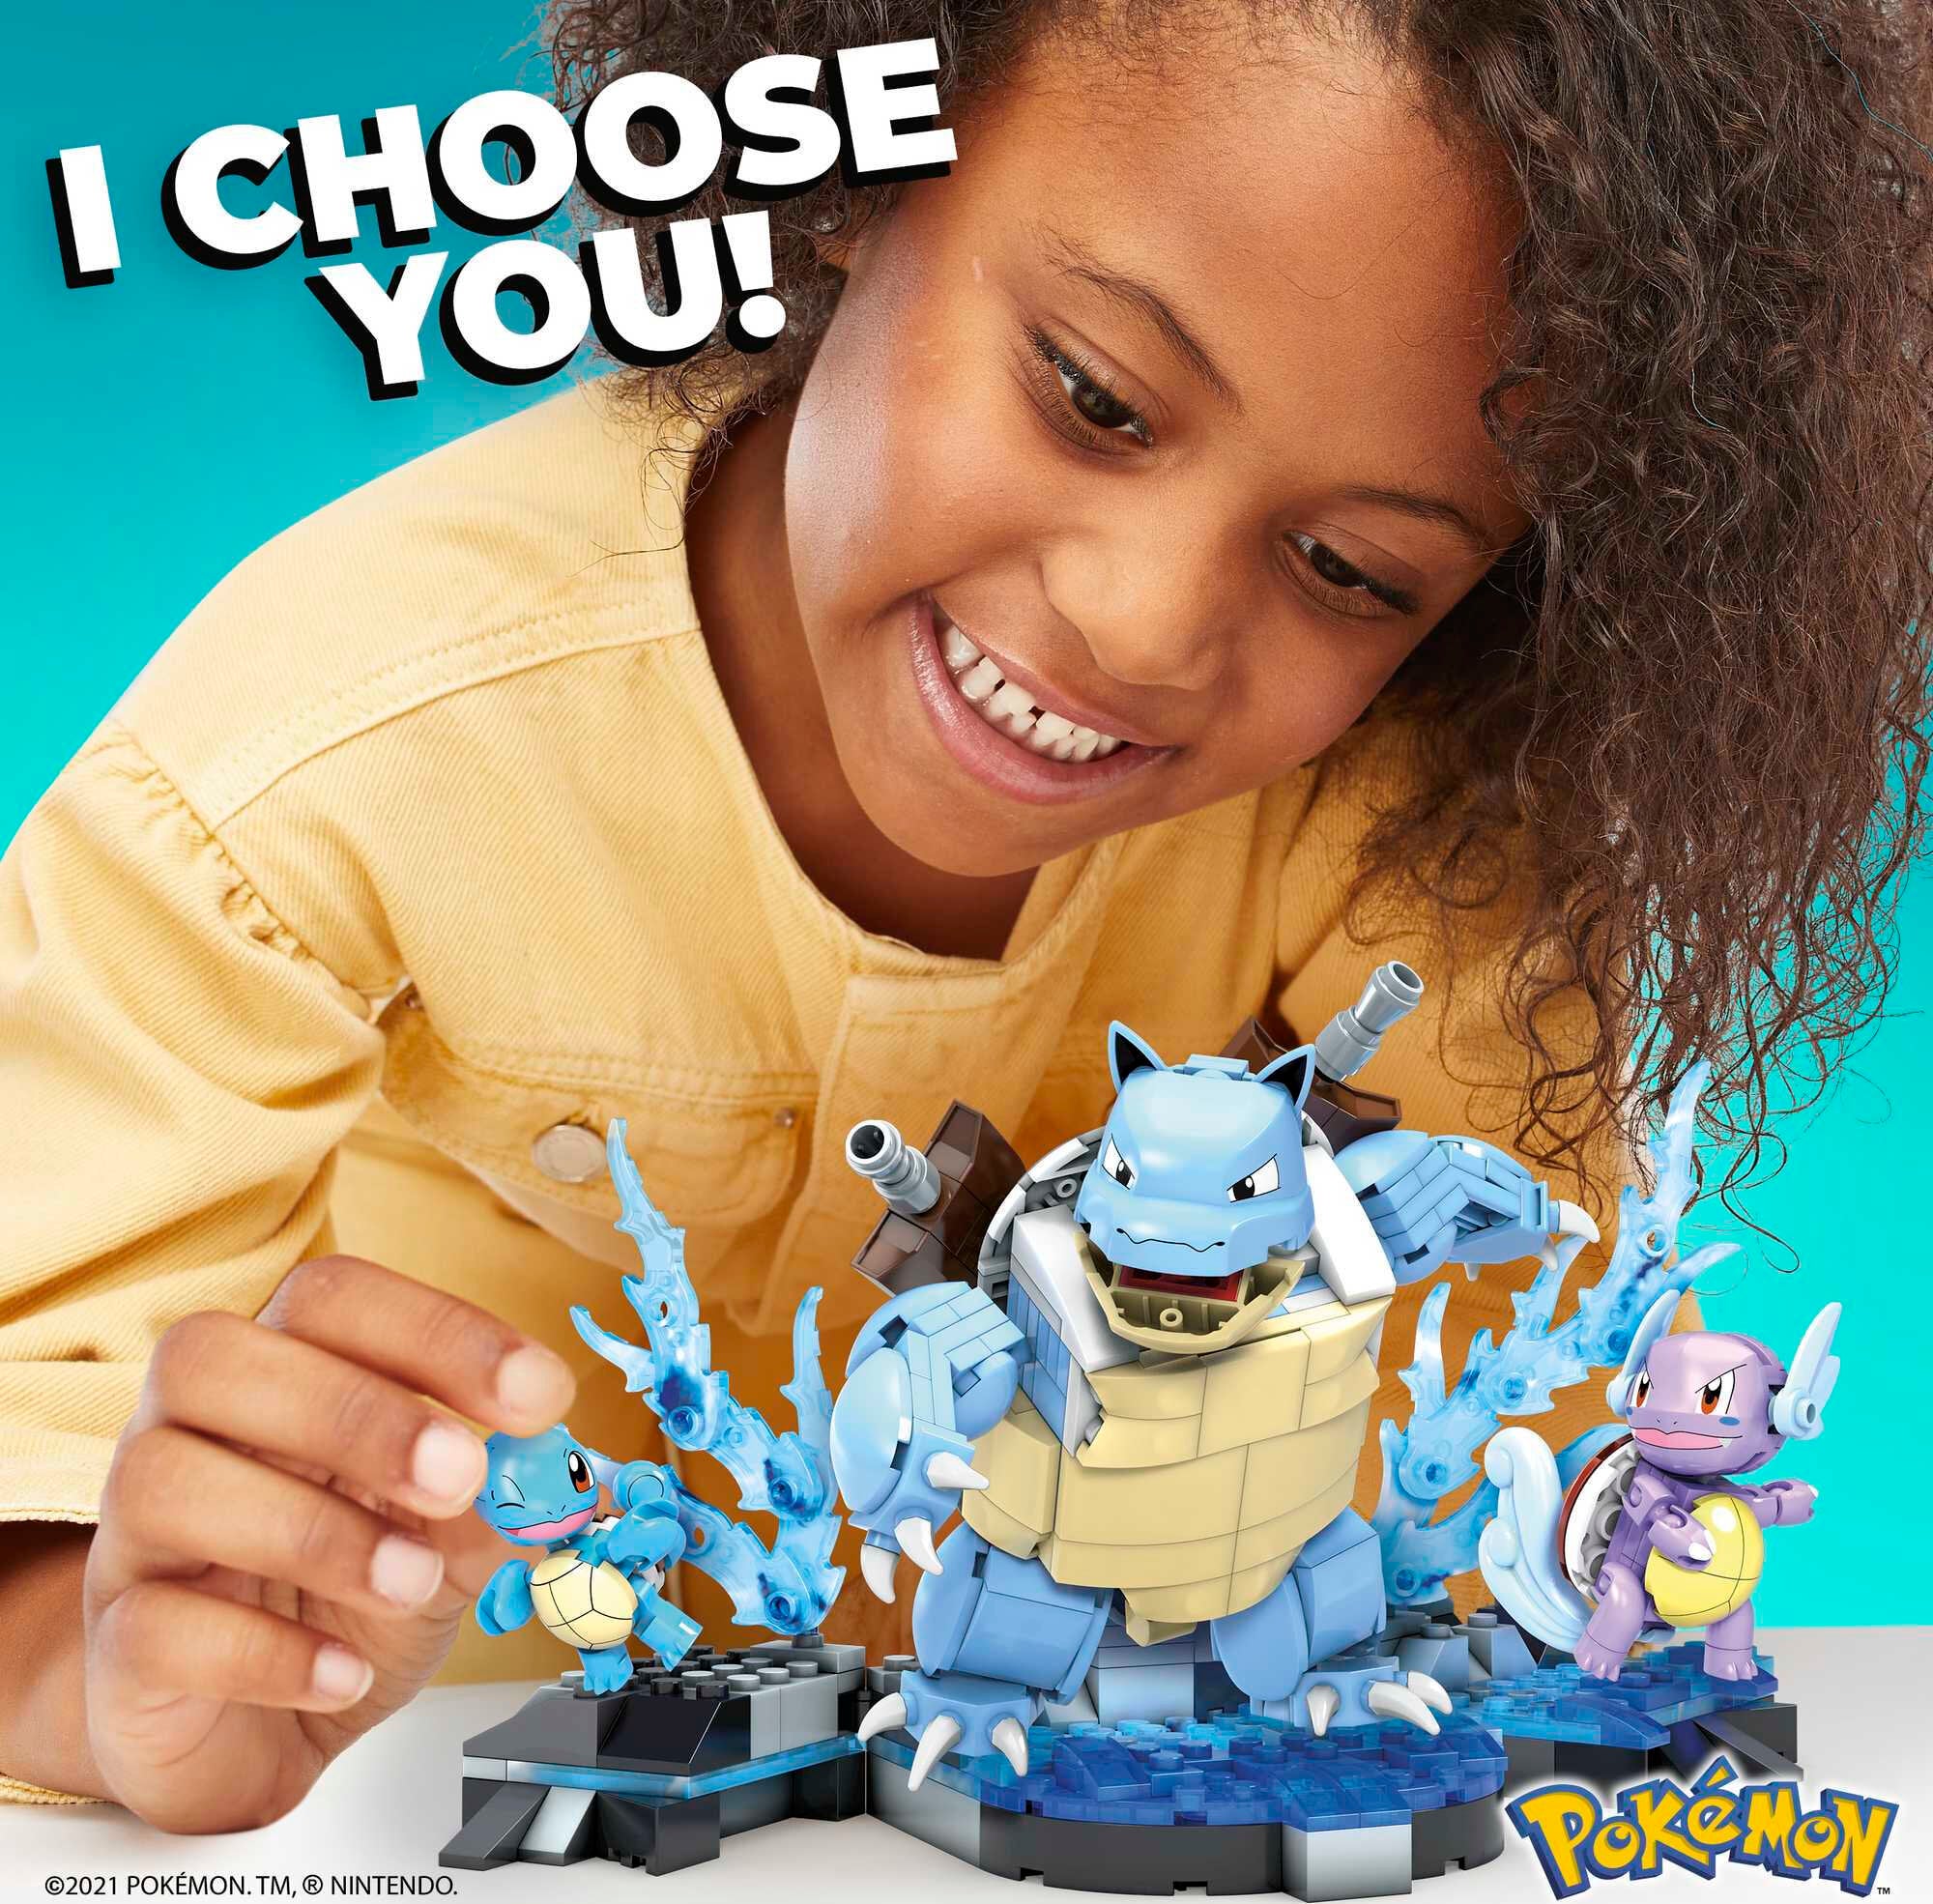 MEGA Pokemon Squirtle Building Toy Kit with 3 Action Figures (379 Pieces) for Kids | MTTS178